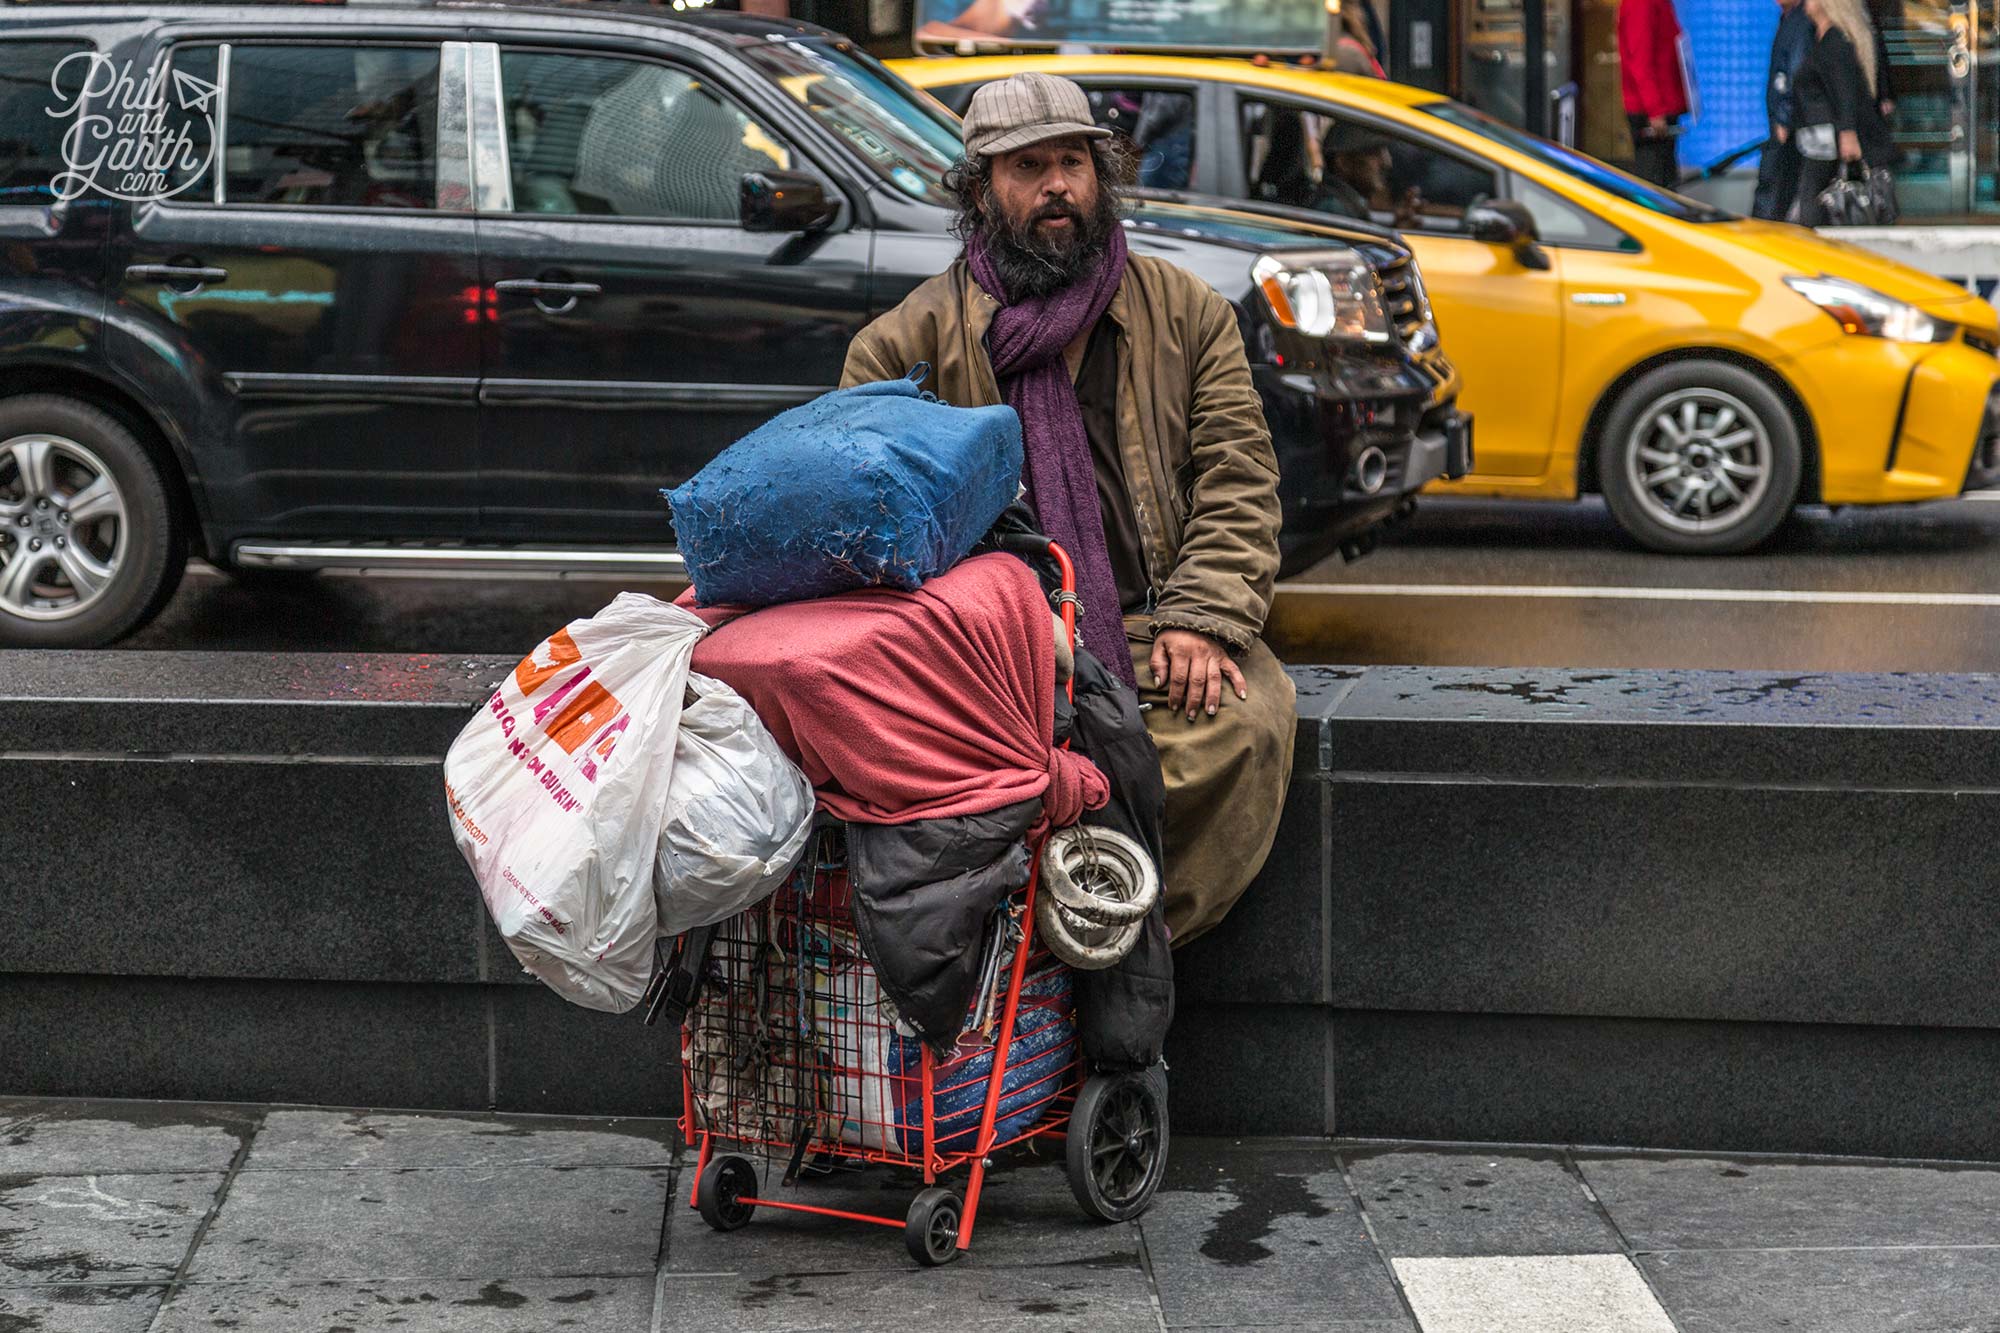 Like many other big cities, there are many homeless people on New York's streets